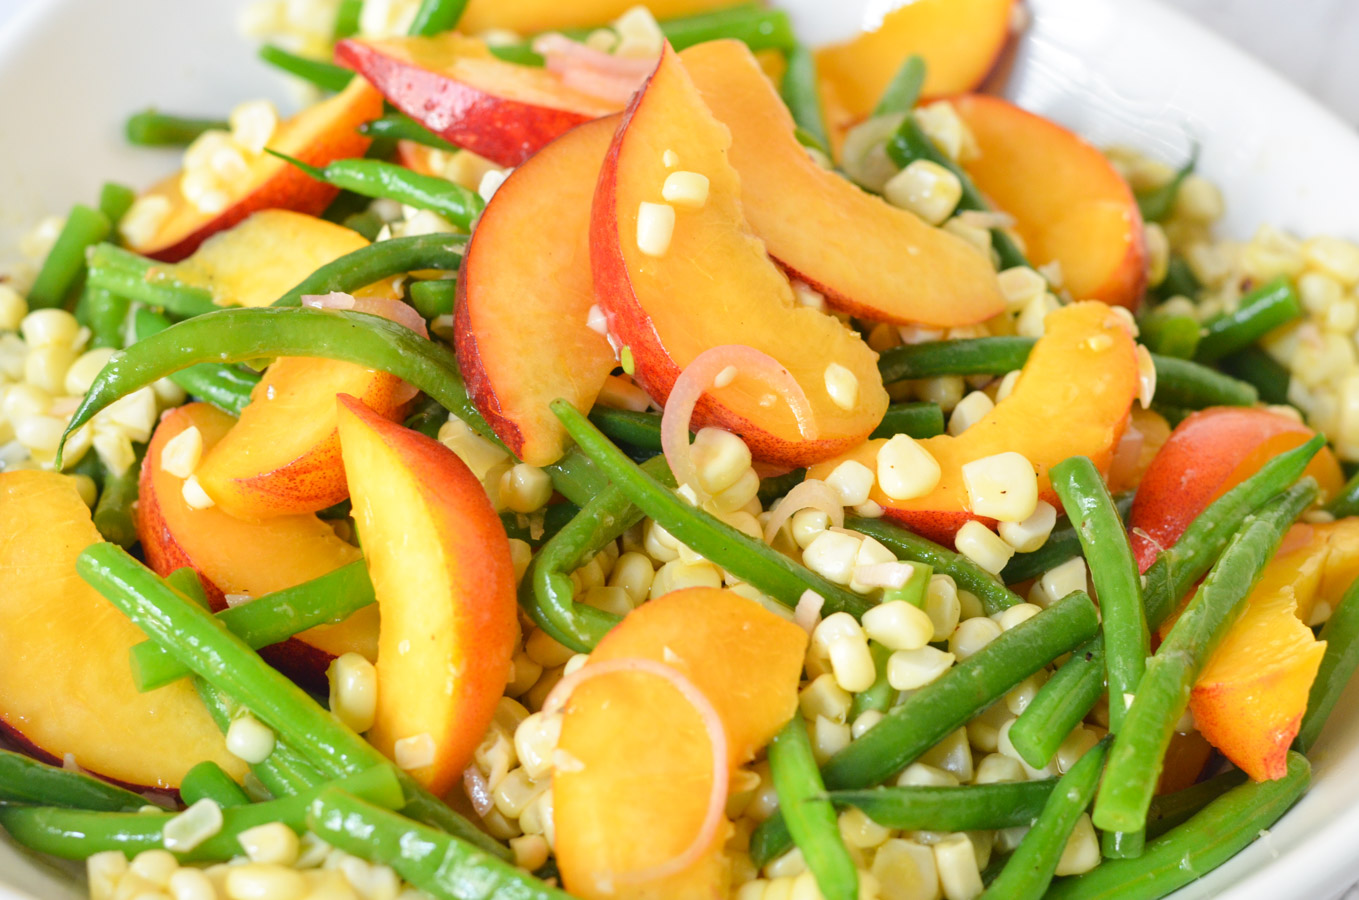 Green Bean, Peach Corn Salad with Summer Fruits and Vegetables